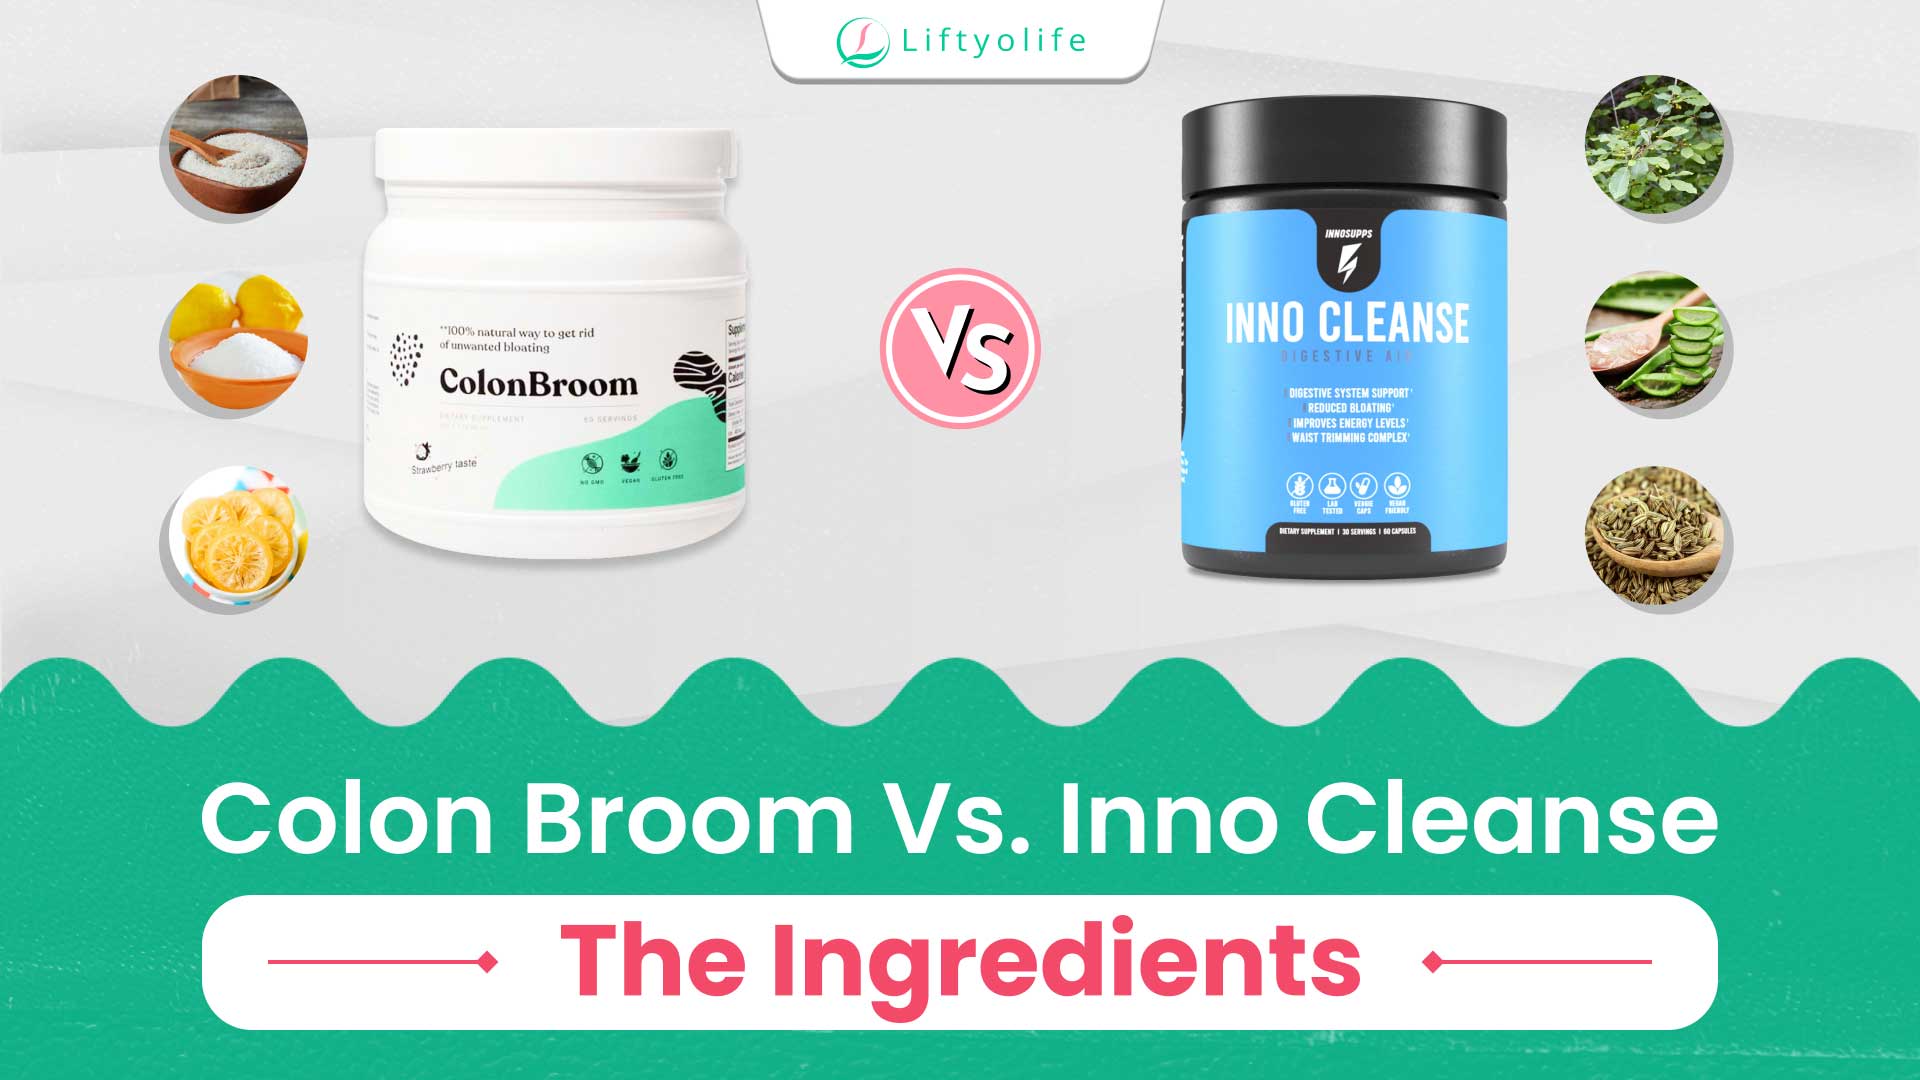 Inno Cleanse Vs Colon Broom: The Ingredients